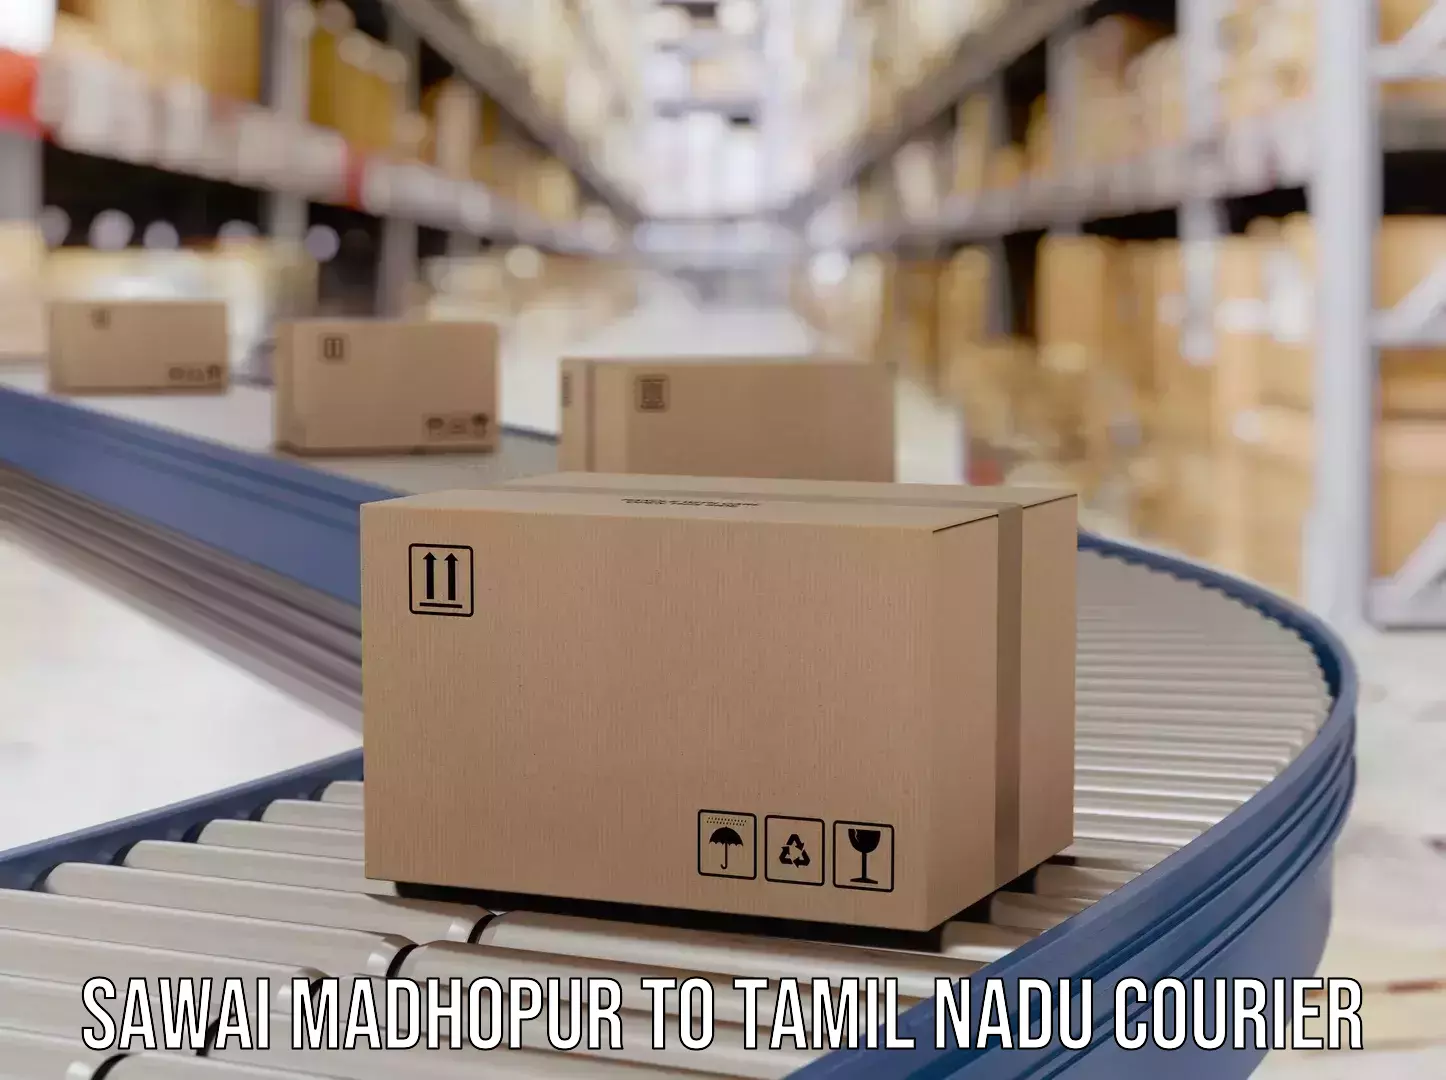 End-to-end delivery in Sawai Madhopur to Thiruporur